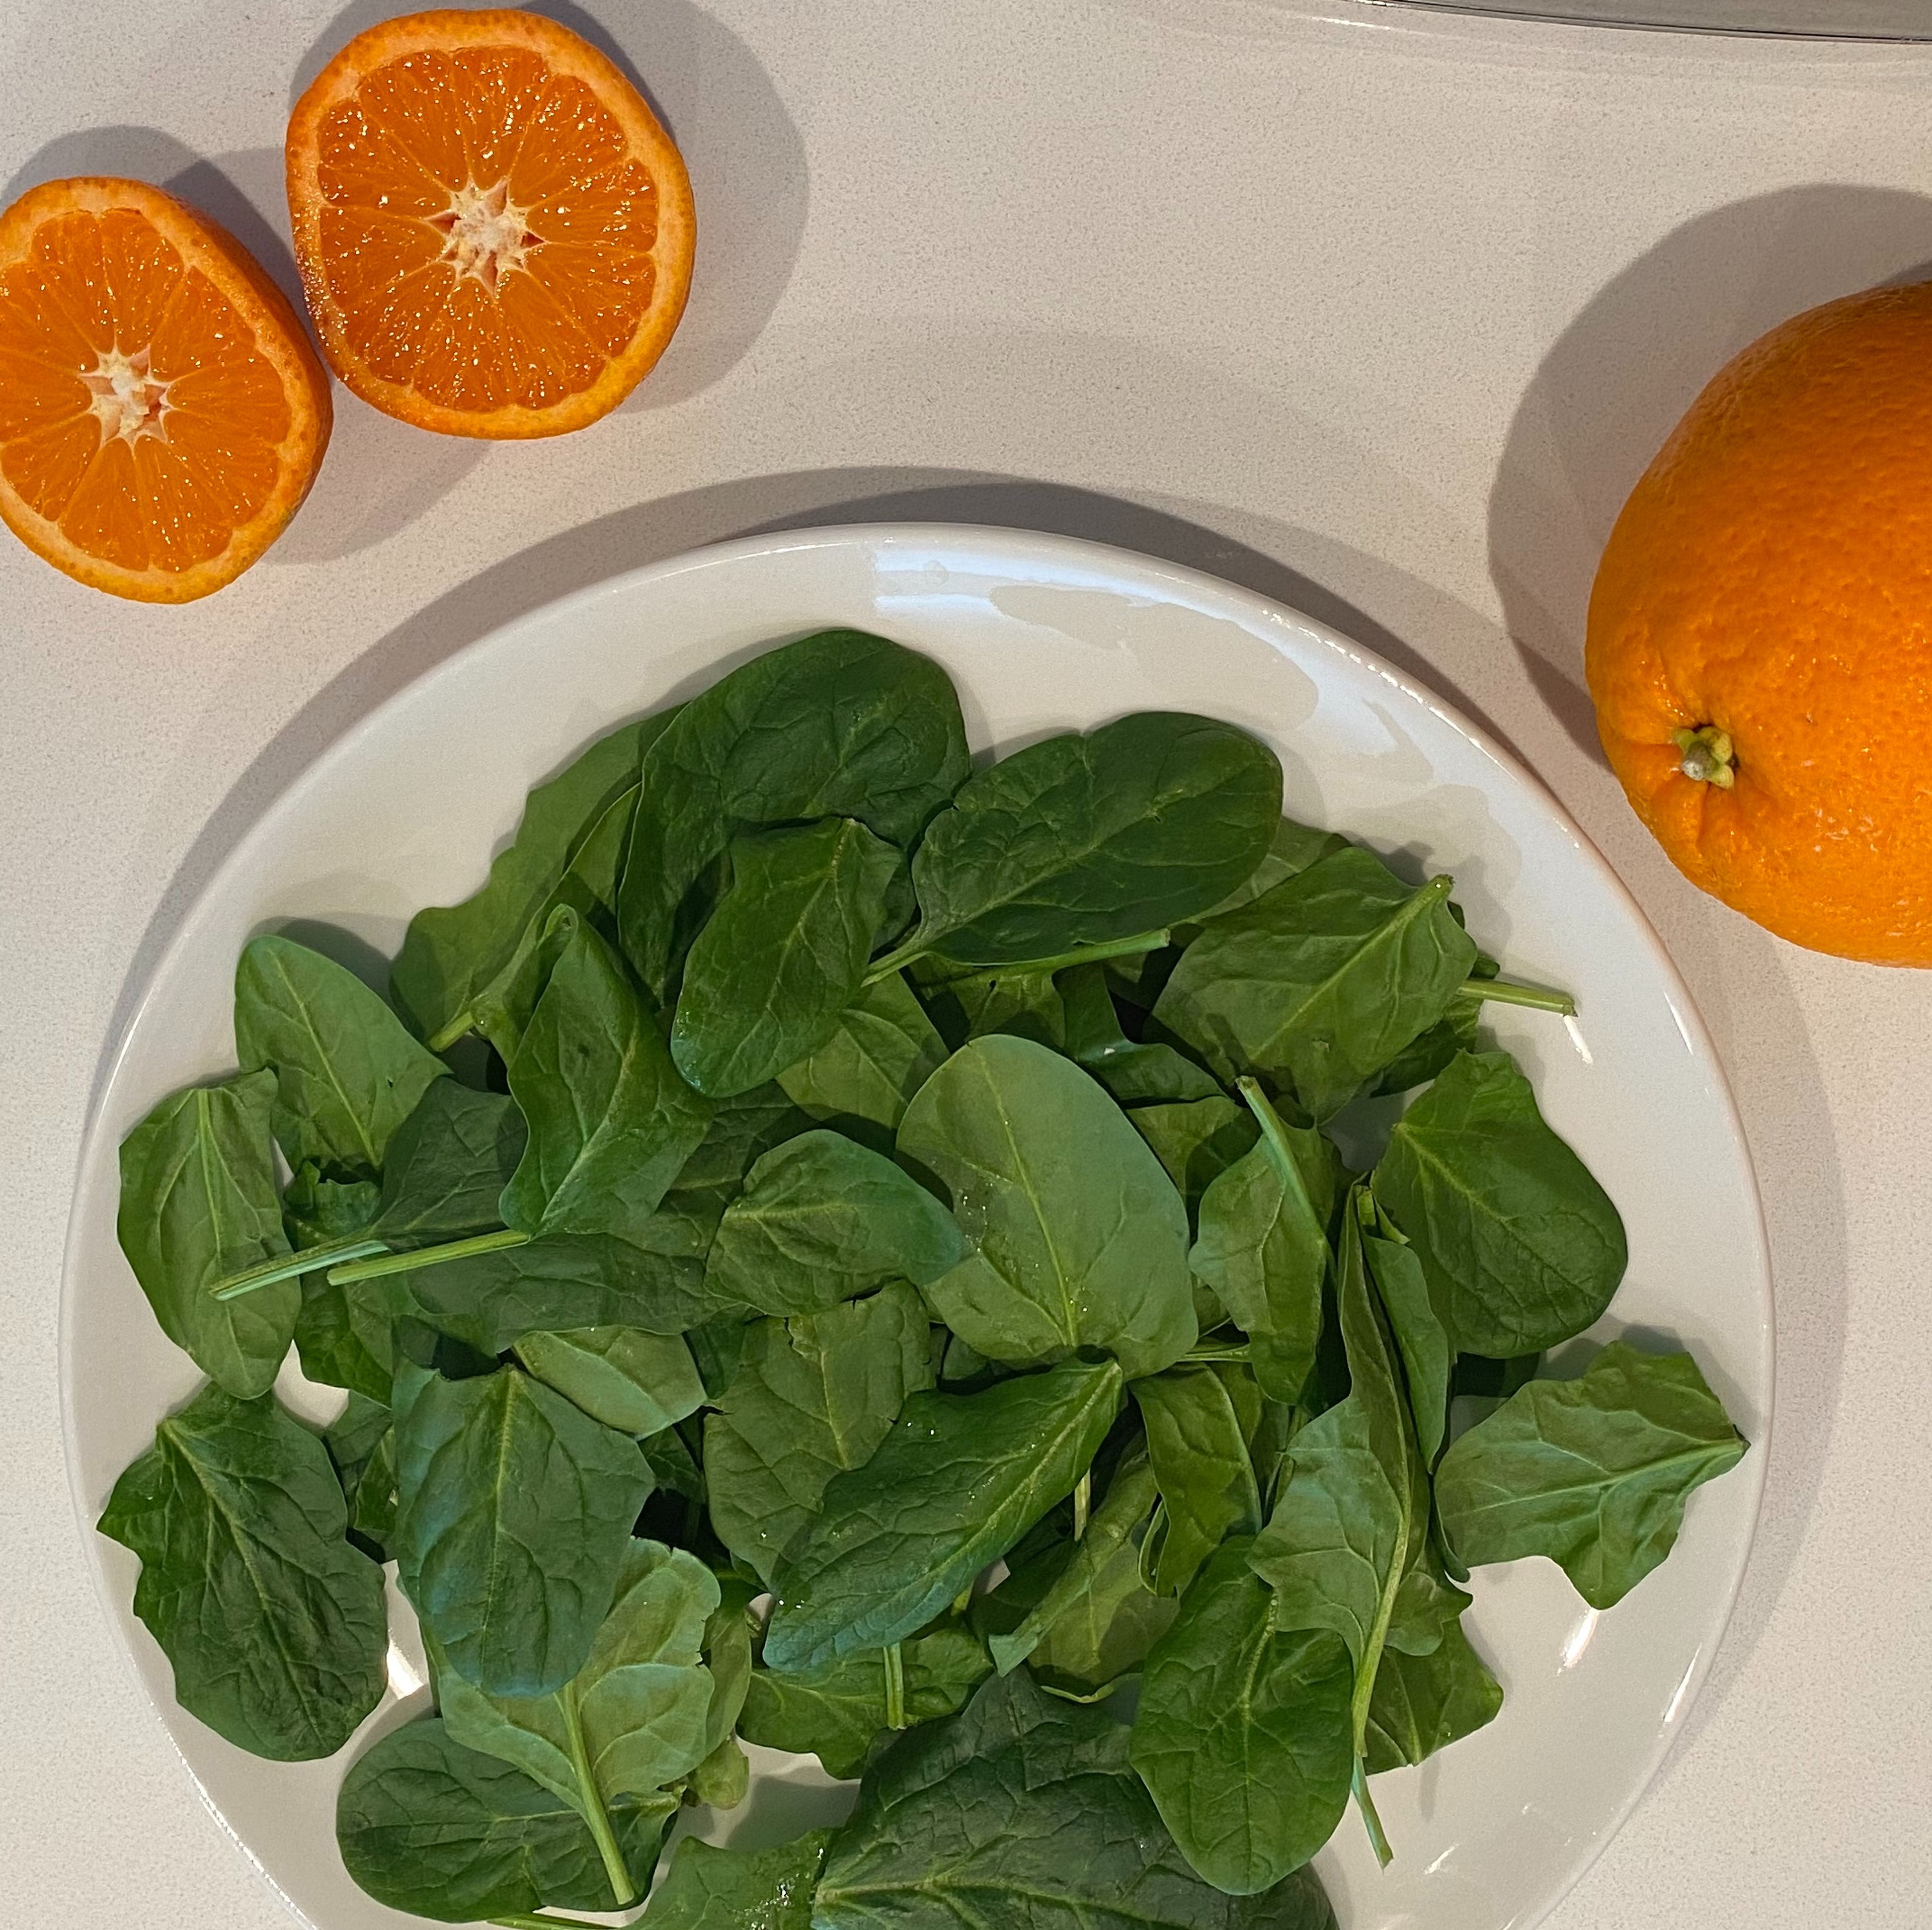 Pre-wash and prepare all the ingredients. First, in a serving plate place spinach.